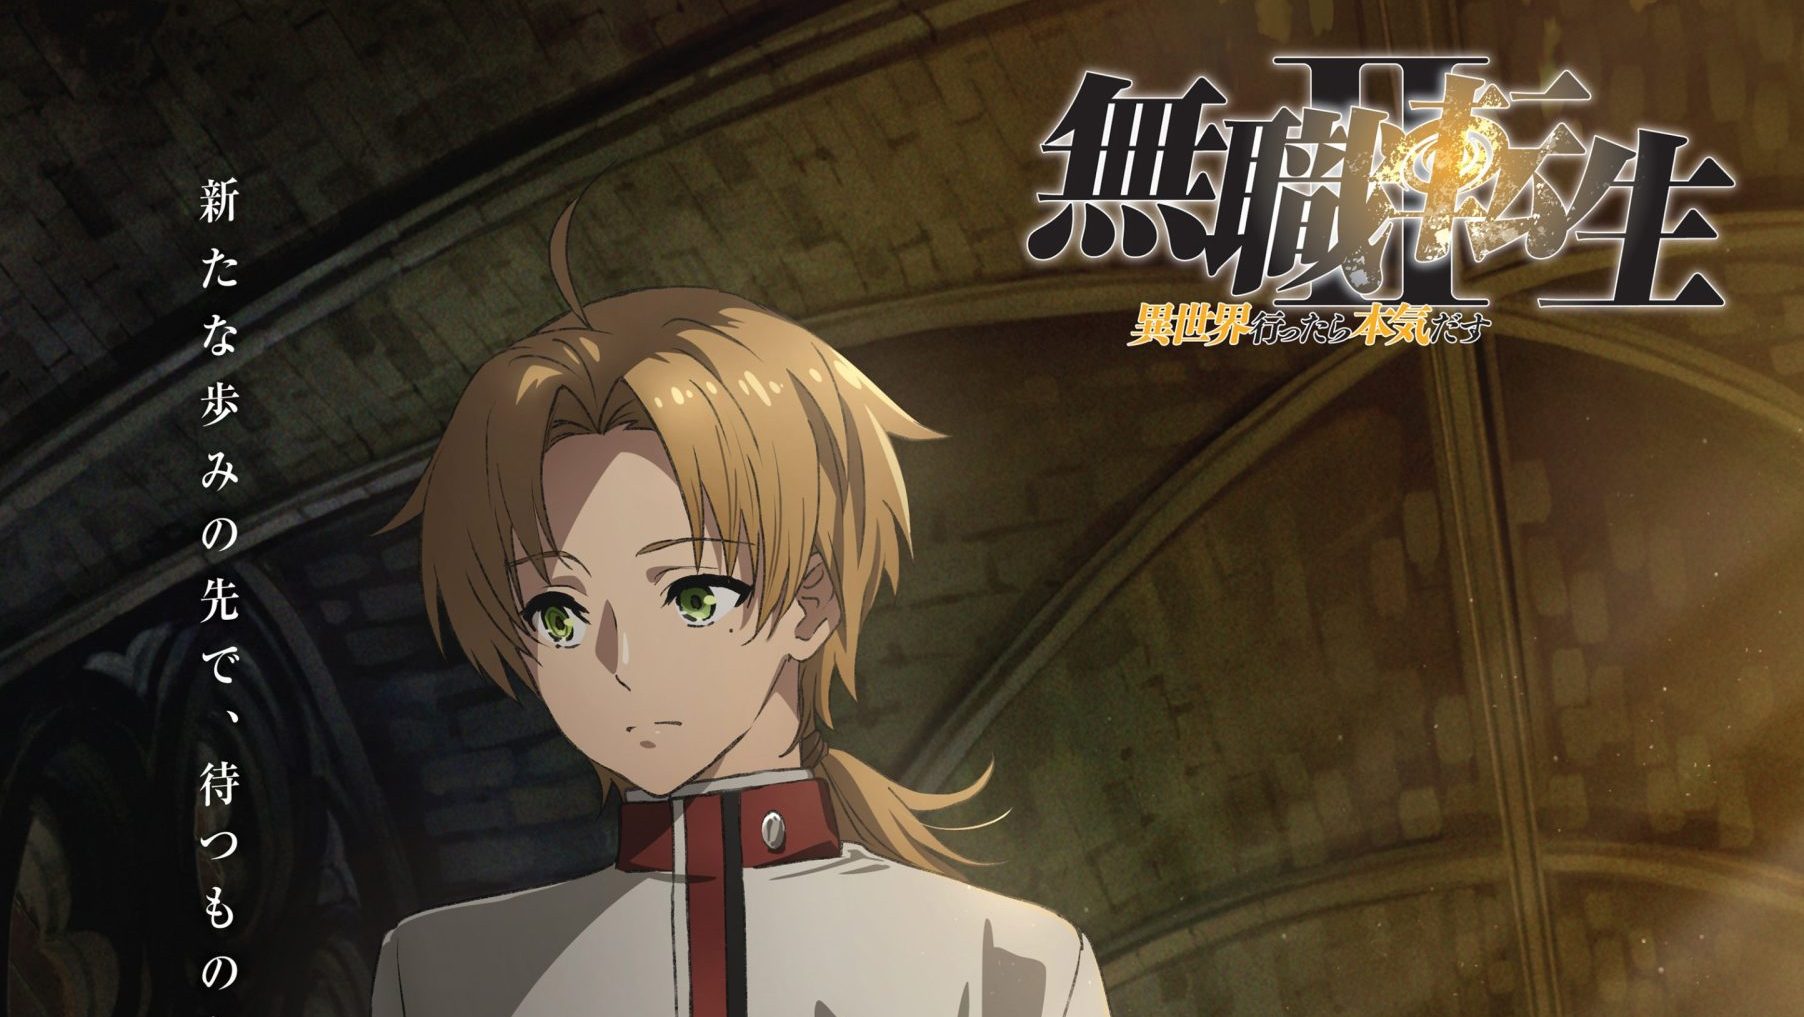 Mushoku Tensei: Jobless Reincarnation's Second Cour Out This Fall